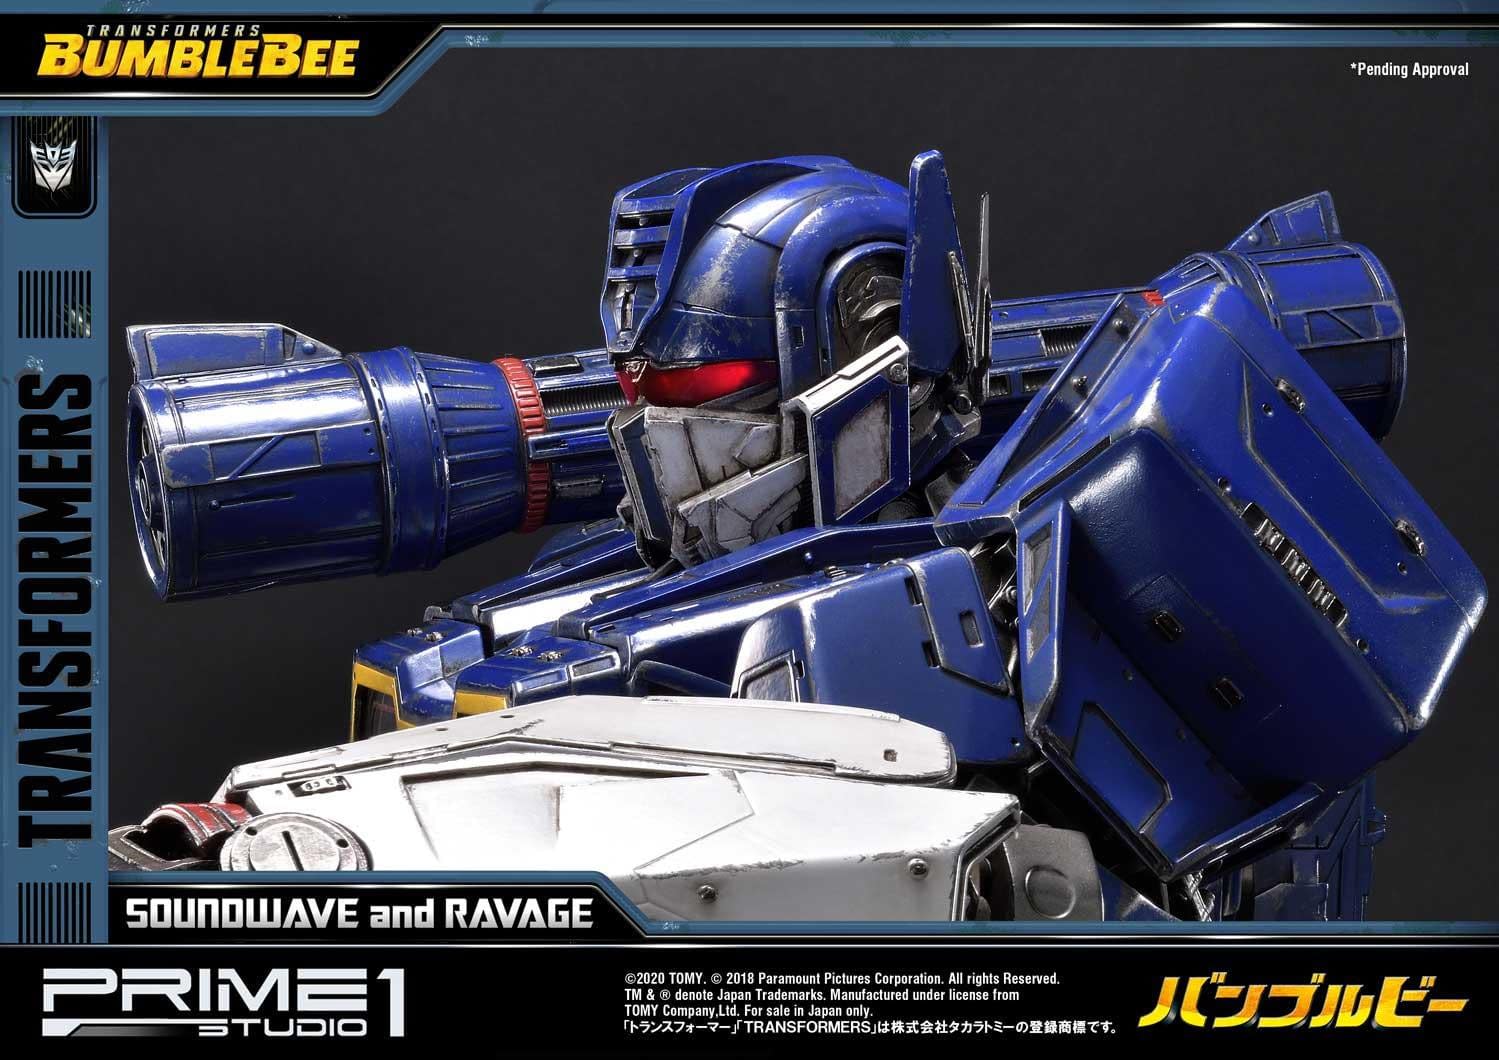 Transformers Soundwave and Ravage Get Expensive with Prime 1 Studio